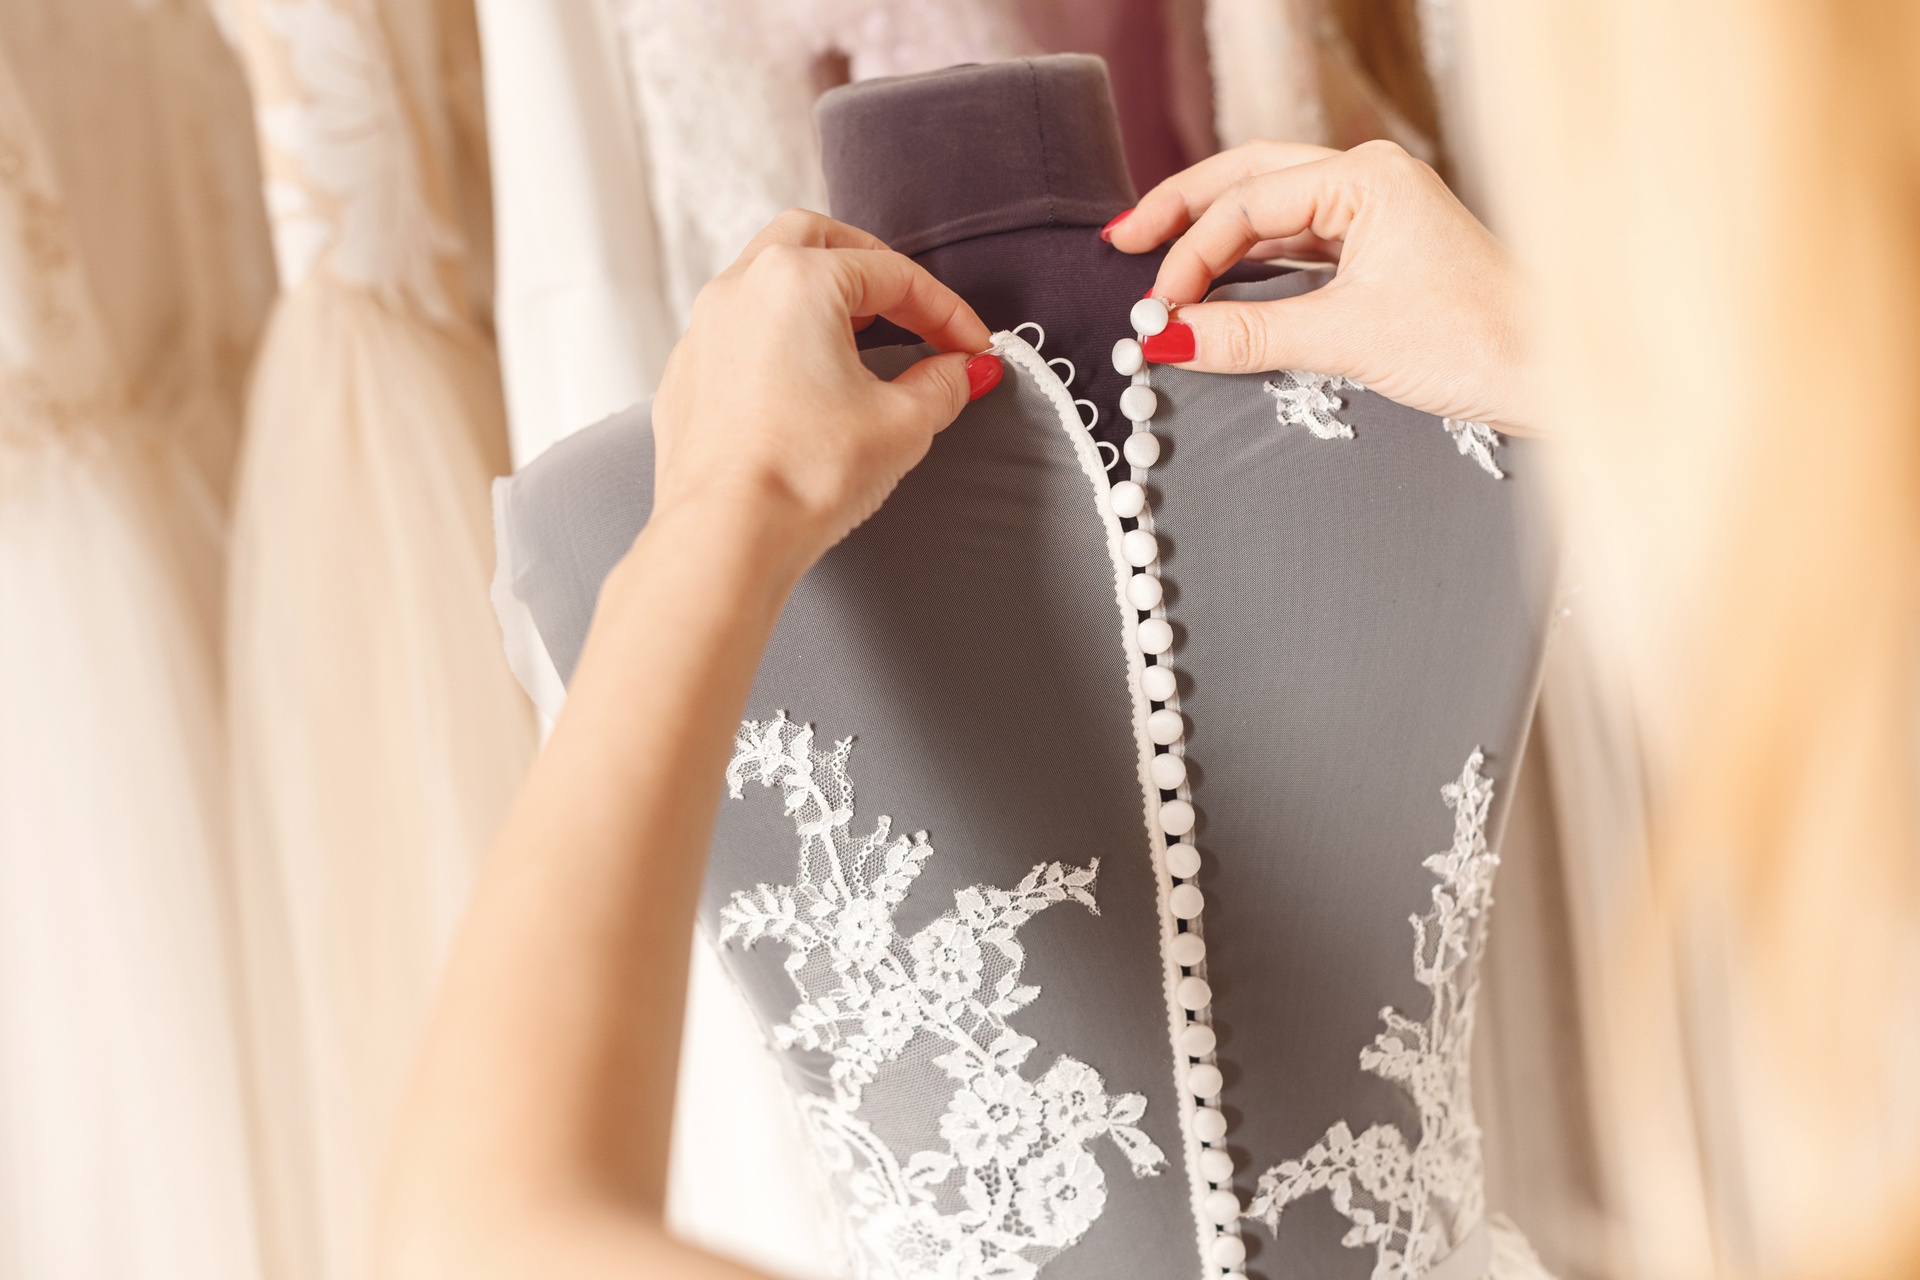 Woman buttoning up the back of a wedding dress